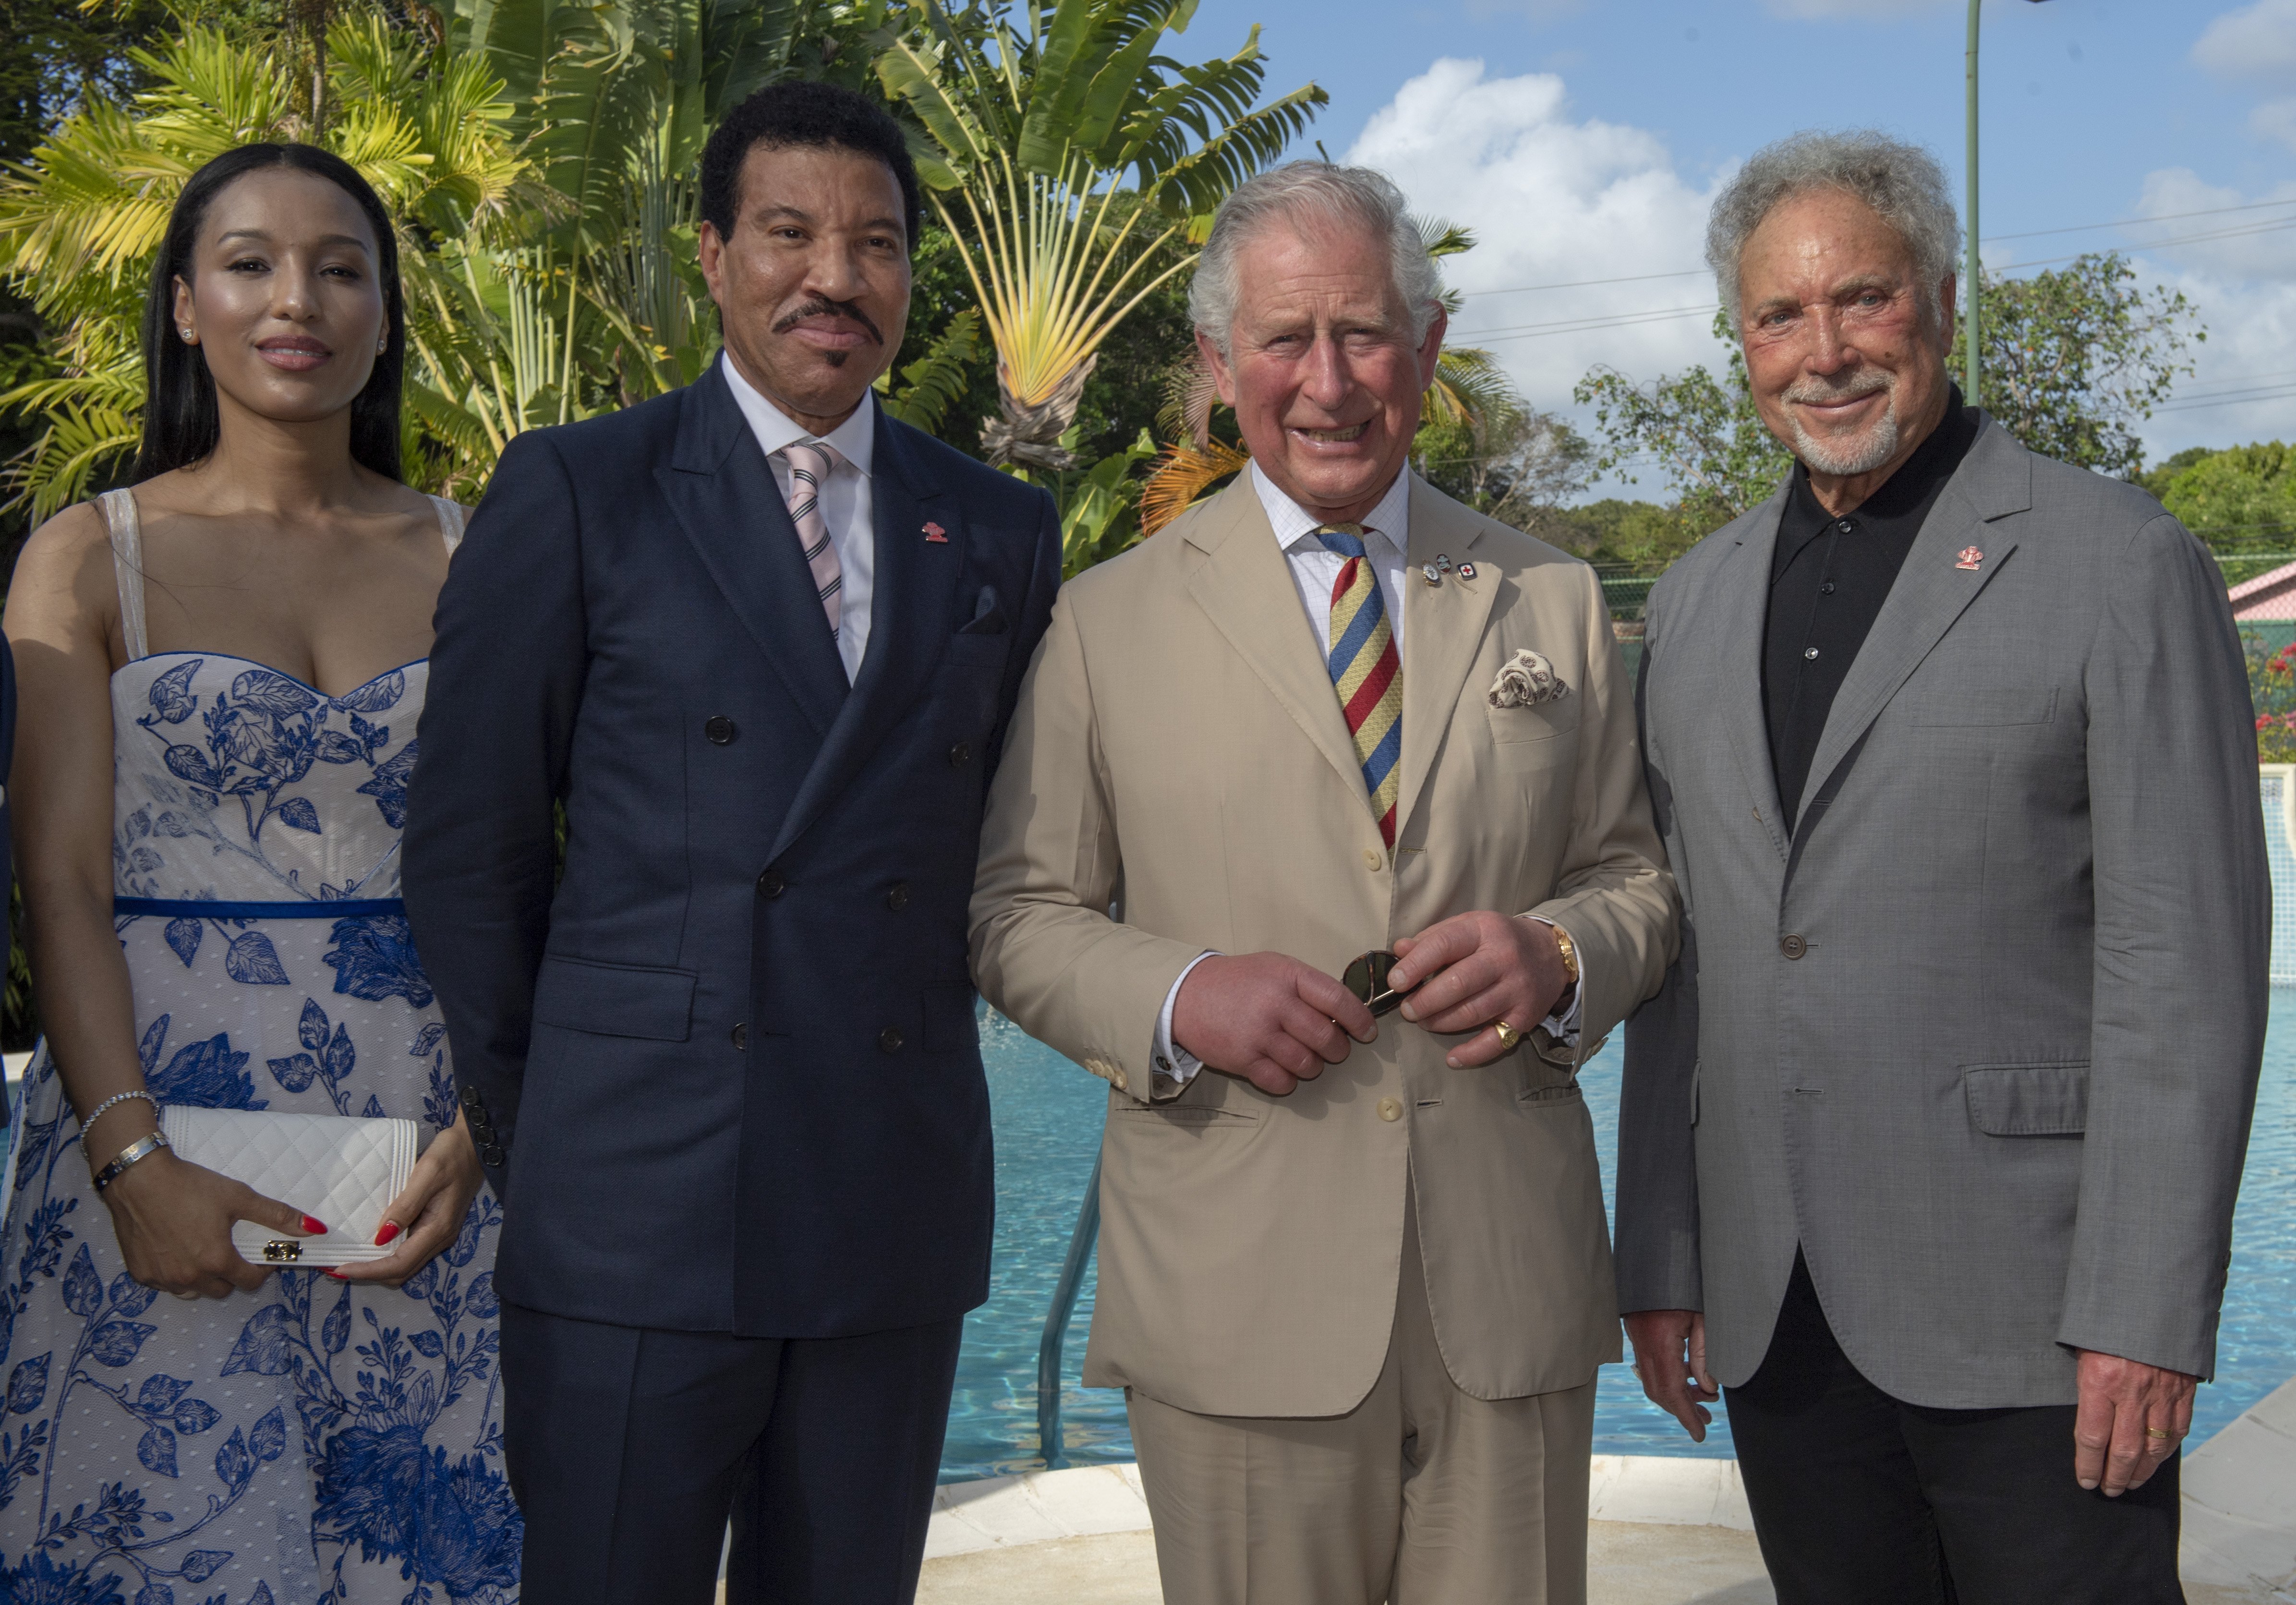 Lisa Parigi, Lionel Richie, Prince Charles and Tom Jones at the Coral Reef Club Hotel | Photo: Getty Images